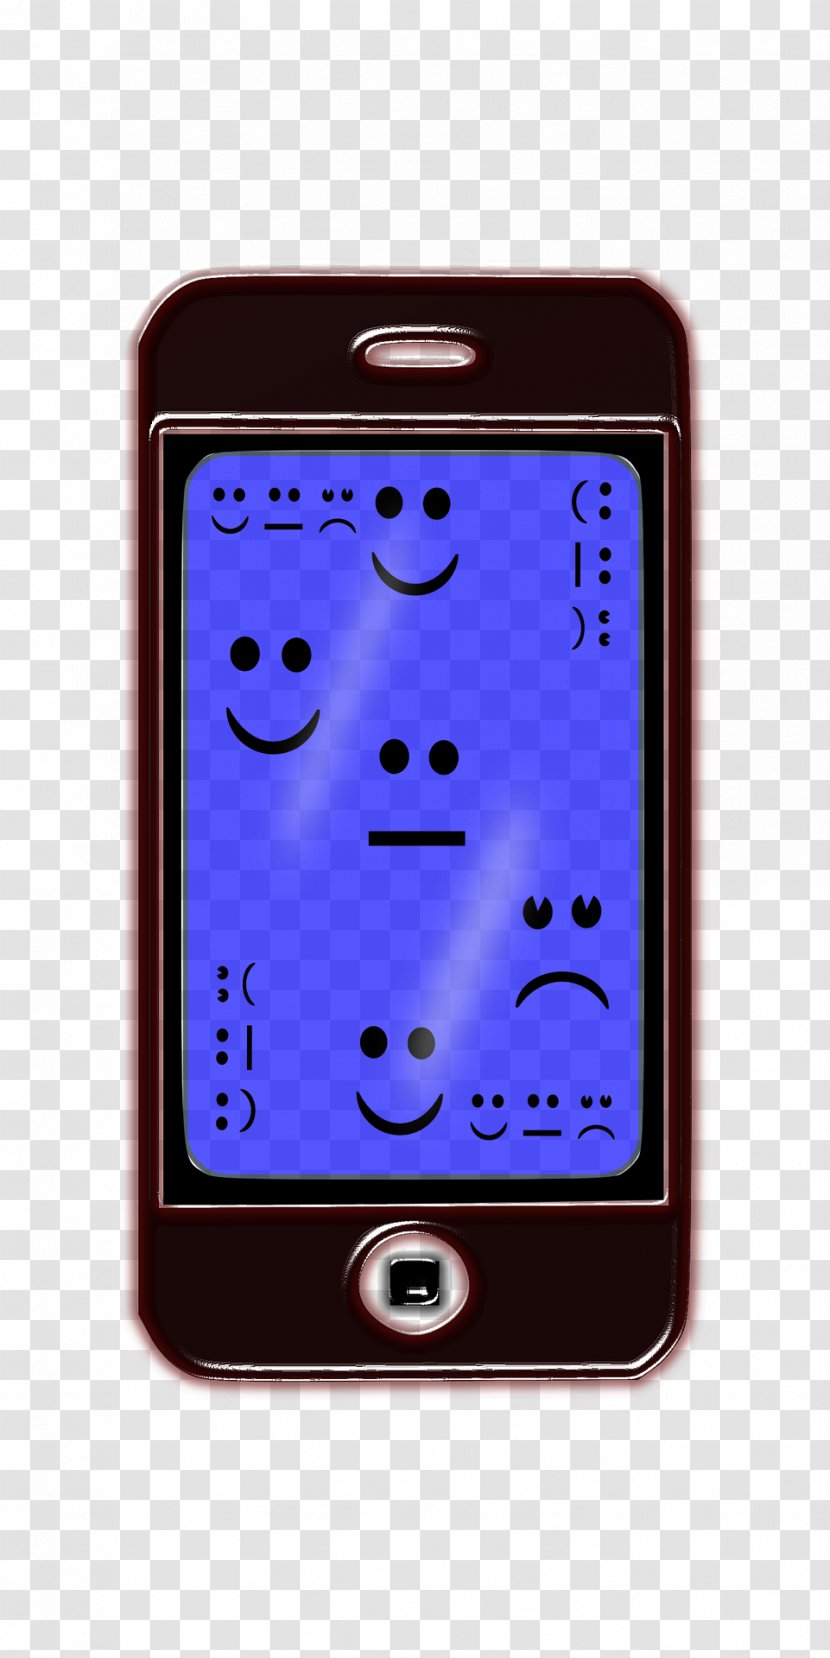 Feature Phone Telephone Mobile Technology Illustration - Electronic Device - Expression Transparent PNG